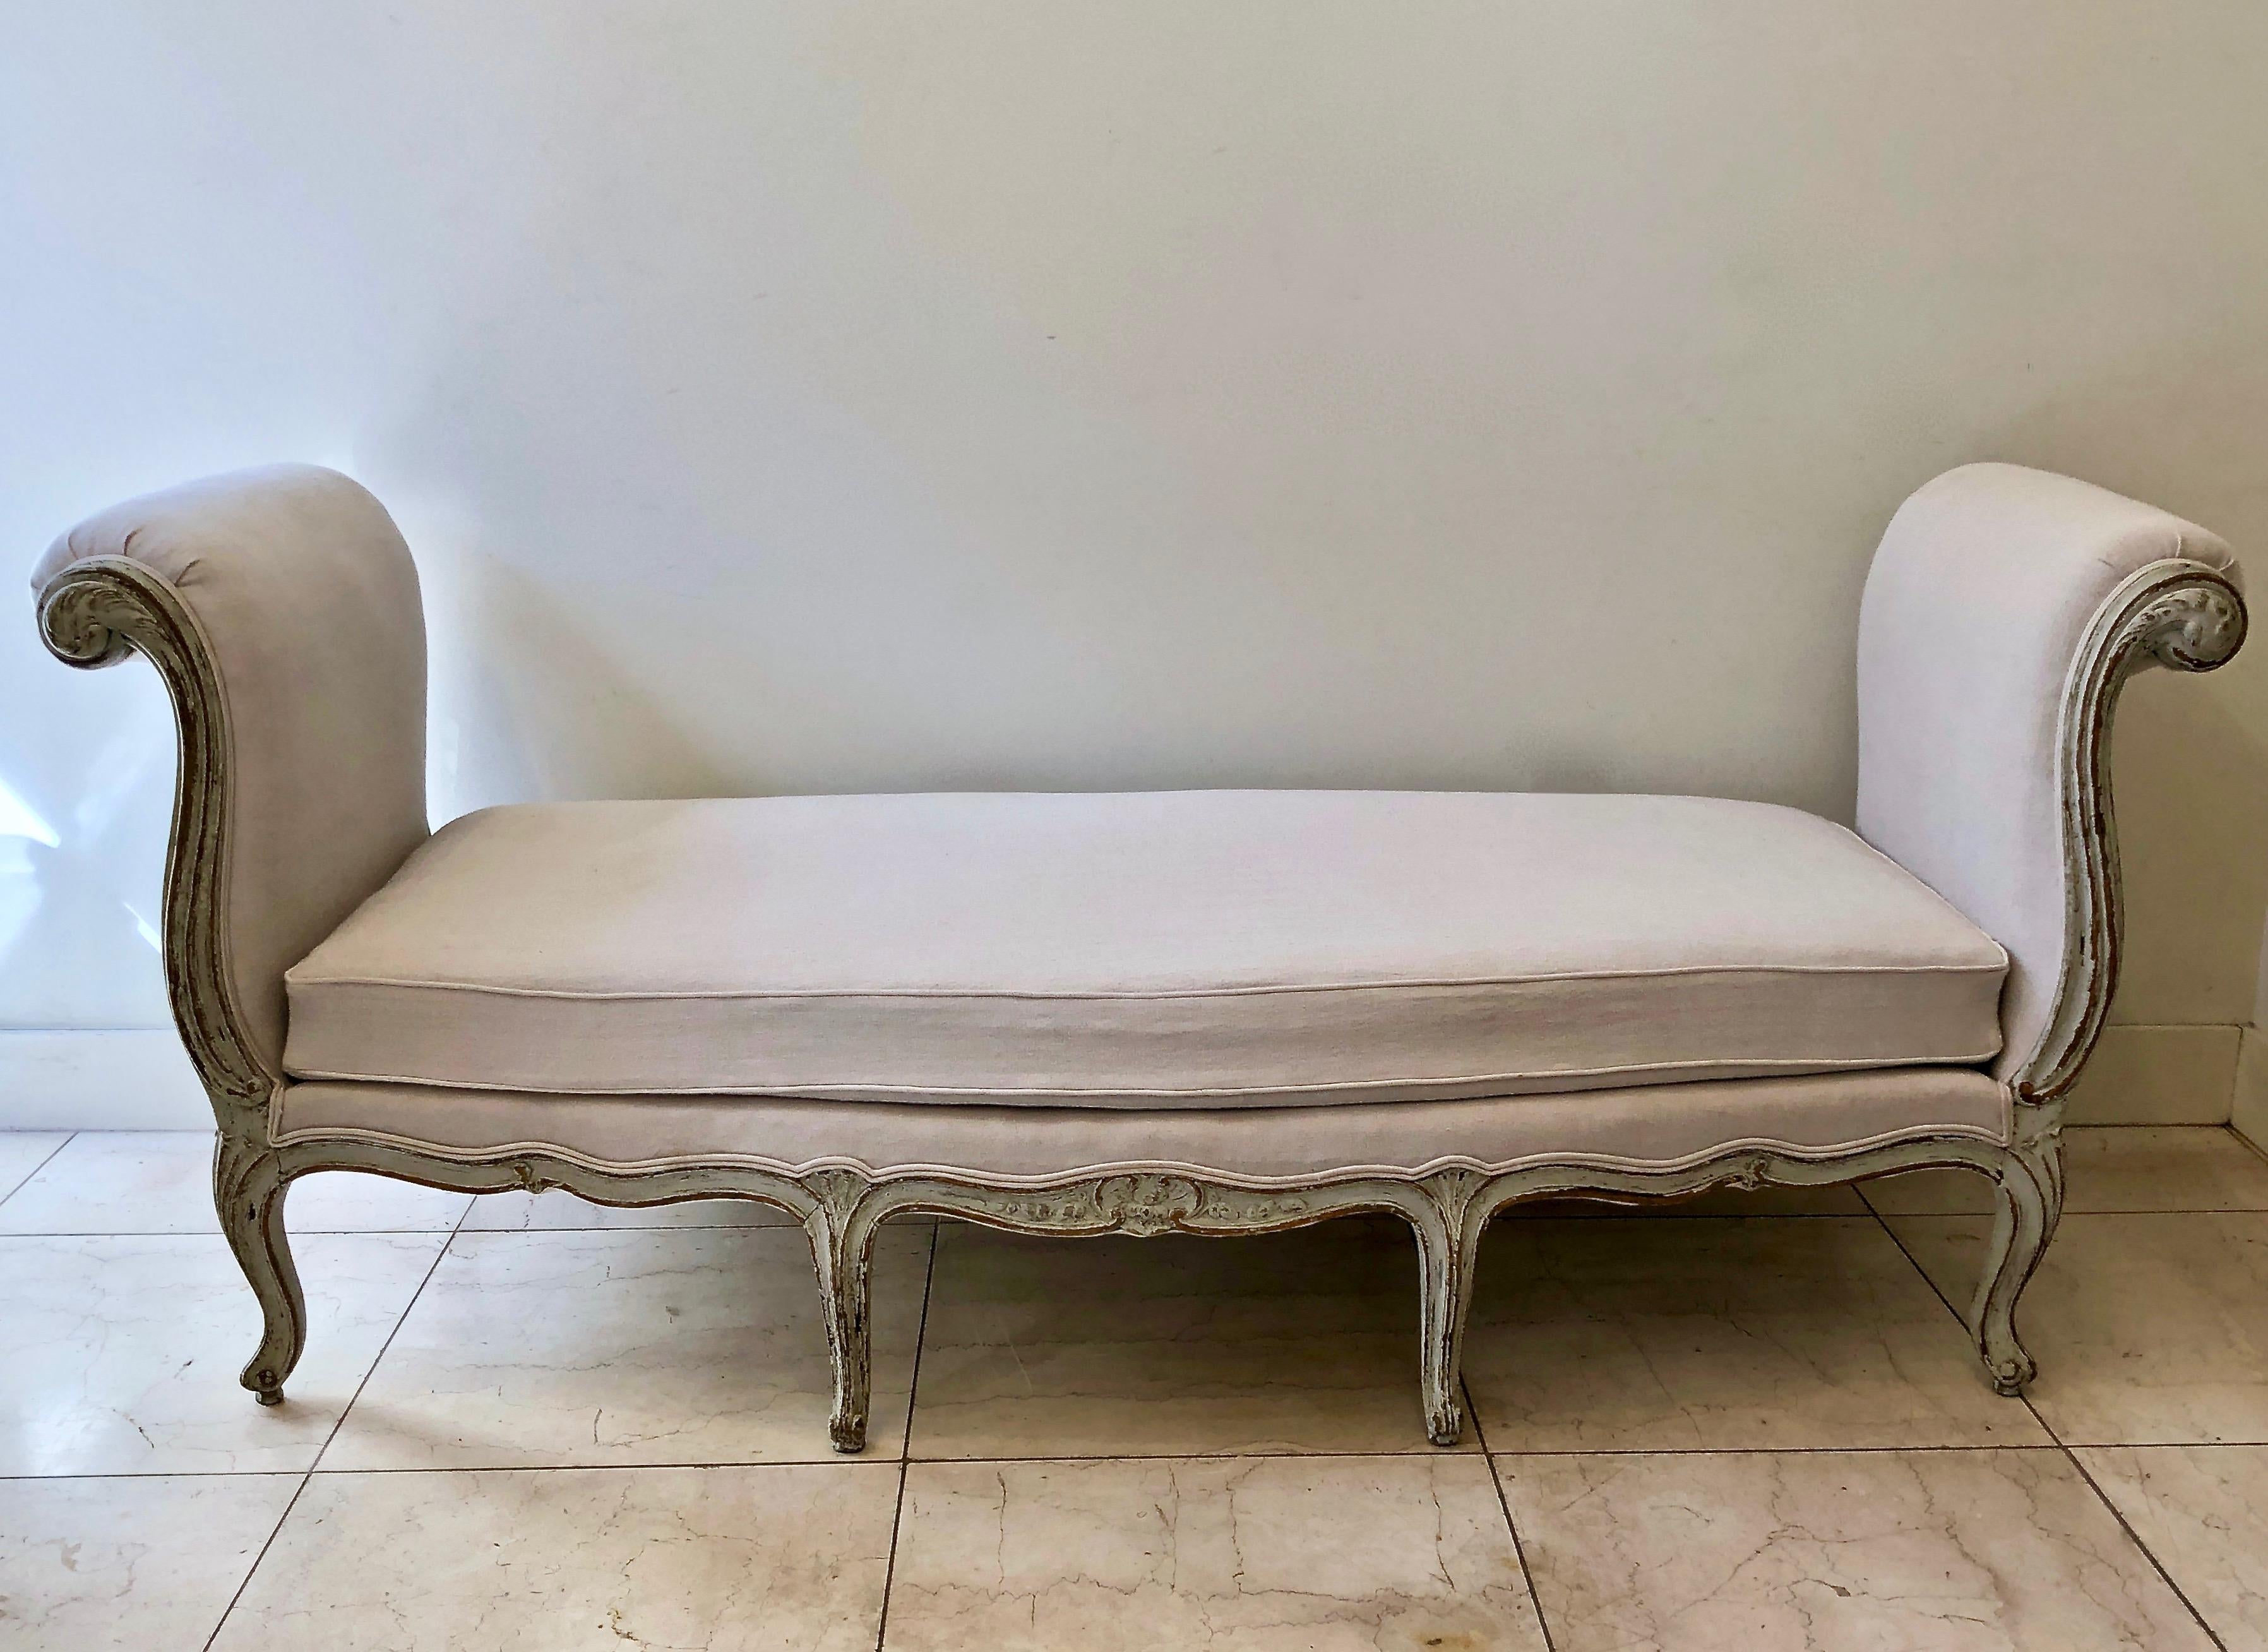 18th century French Louis XV style daybed with richly carved apron and armrests. Newly upholstered with palest of palest gray linen.
Here are few examples surprising pieces and objects, authentic, decorative and rare items that you will only see in